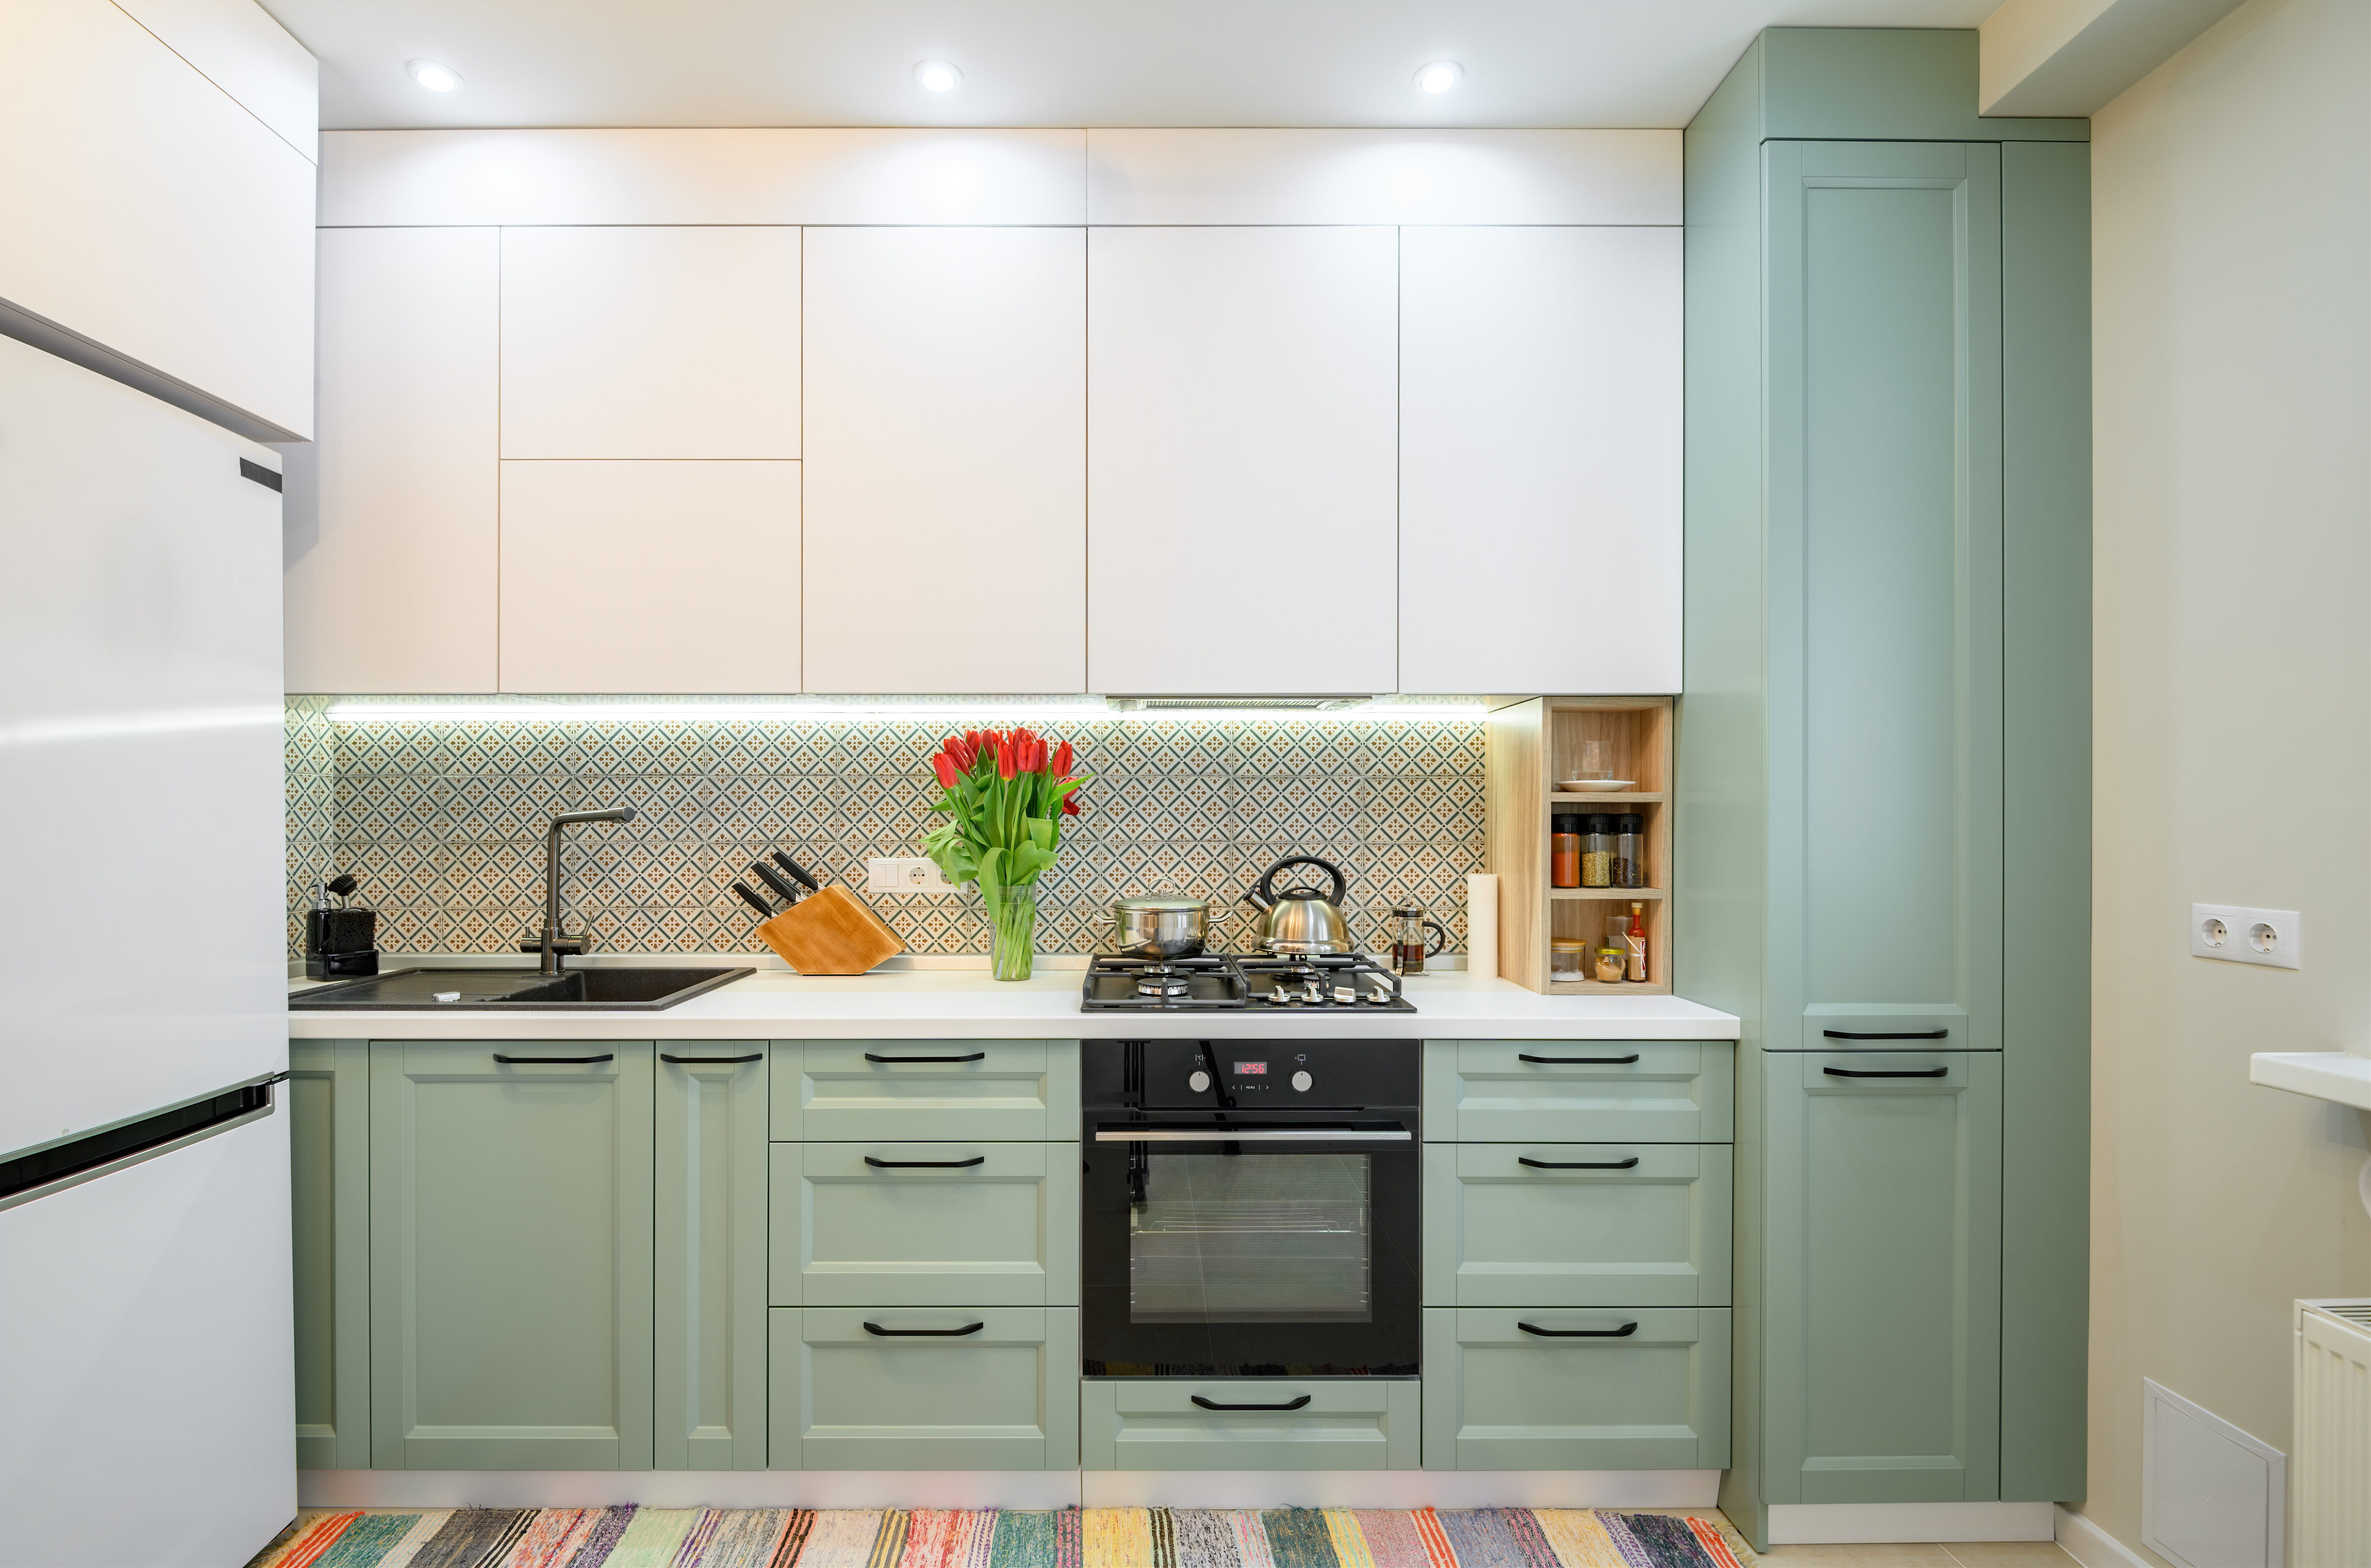 How to Make Rental Cabinets Look Better: A Simple 7 Step Guide